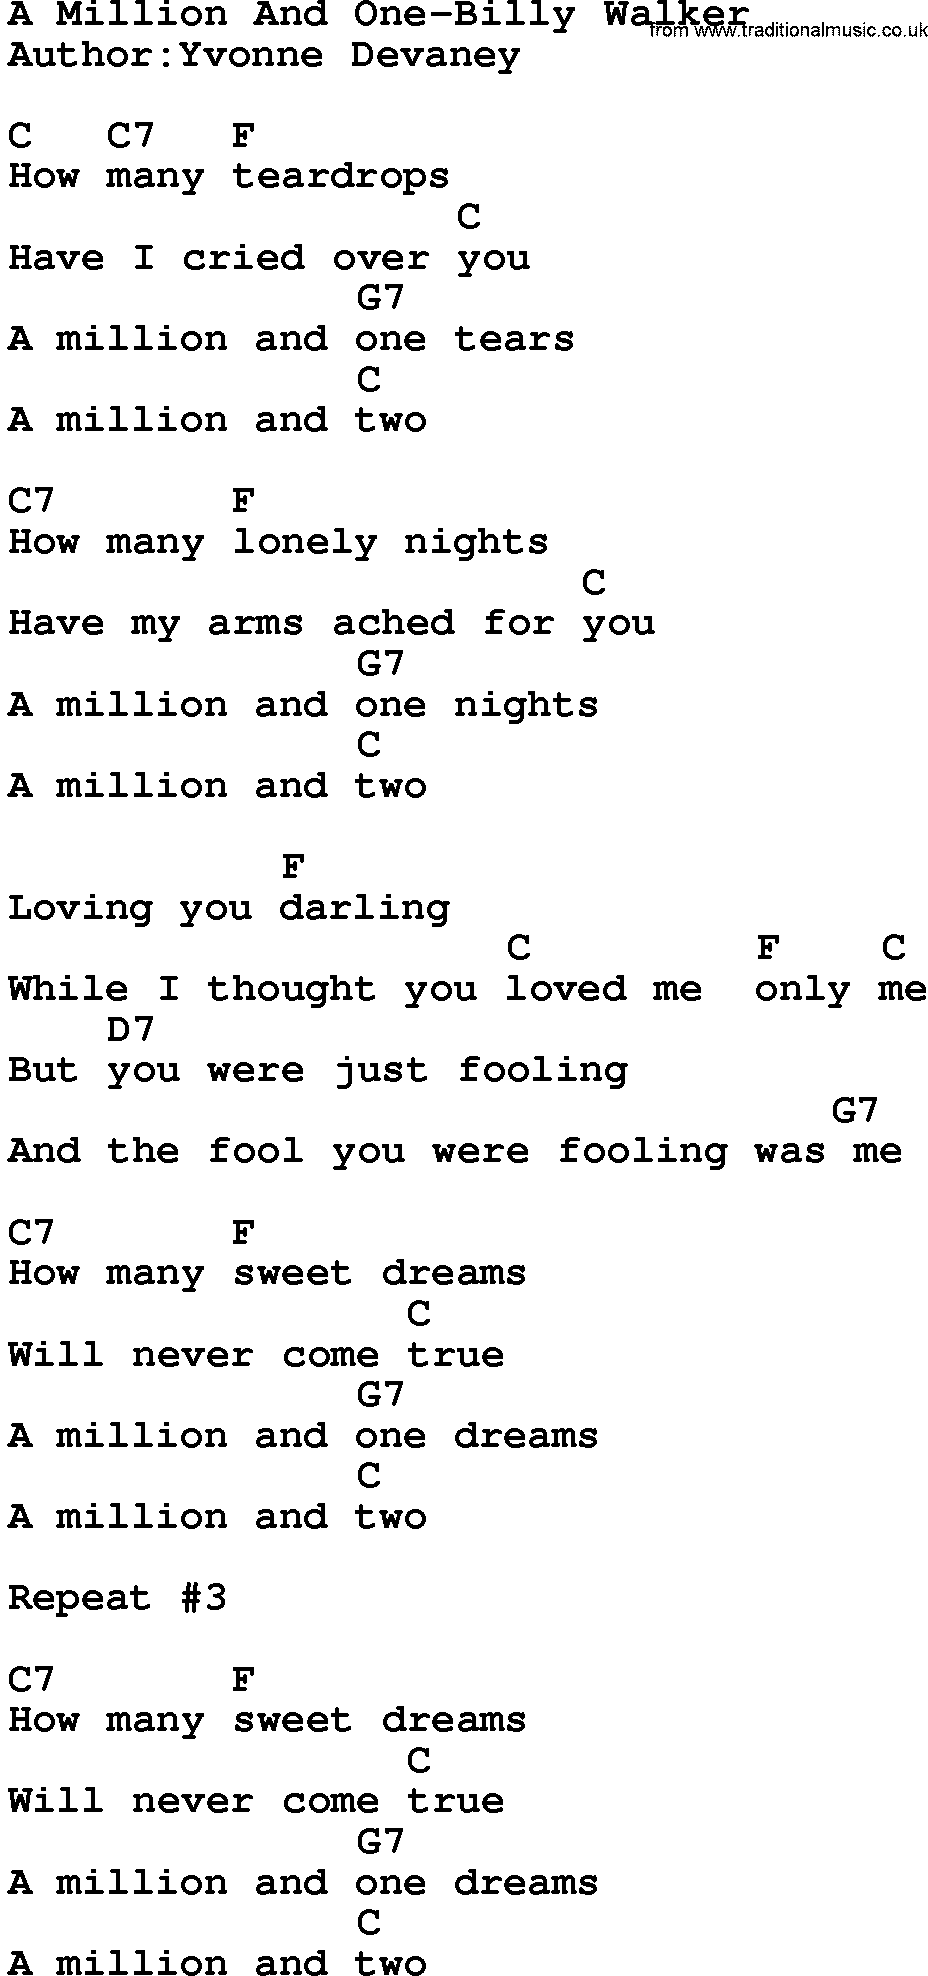 Country music song: A Million And One-Billy Walker lyrics and chords